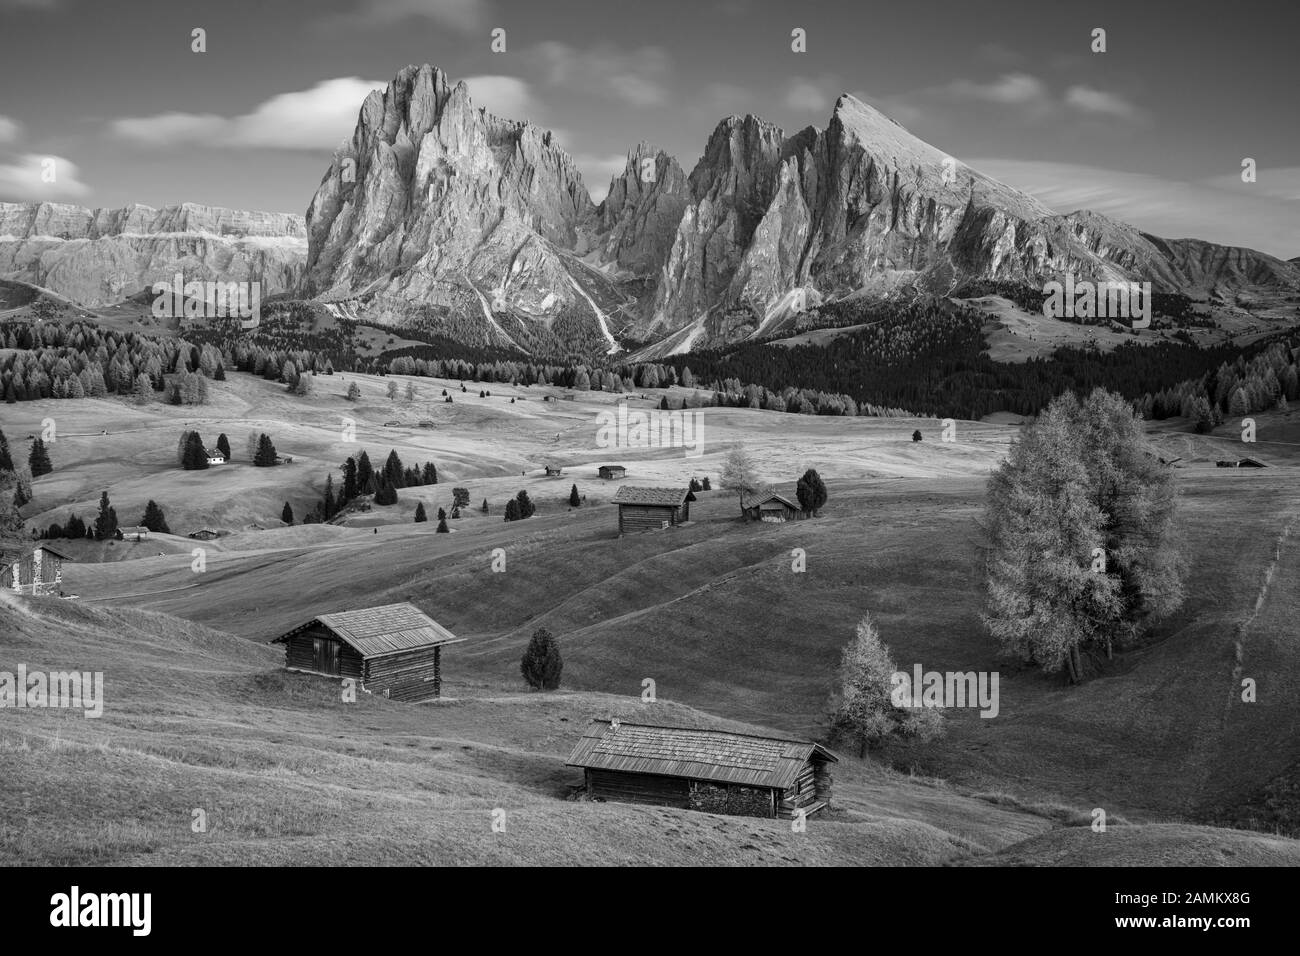 Seiser Alm, Dolomites. Black and white landscape image of Seiser Alm a Dolomite plateau and the largest high-altitude Alpine meadow in Europe. Stock Photo